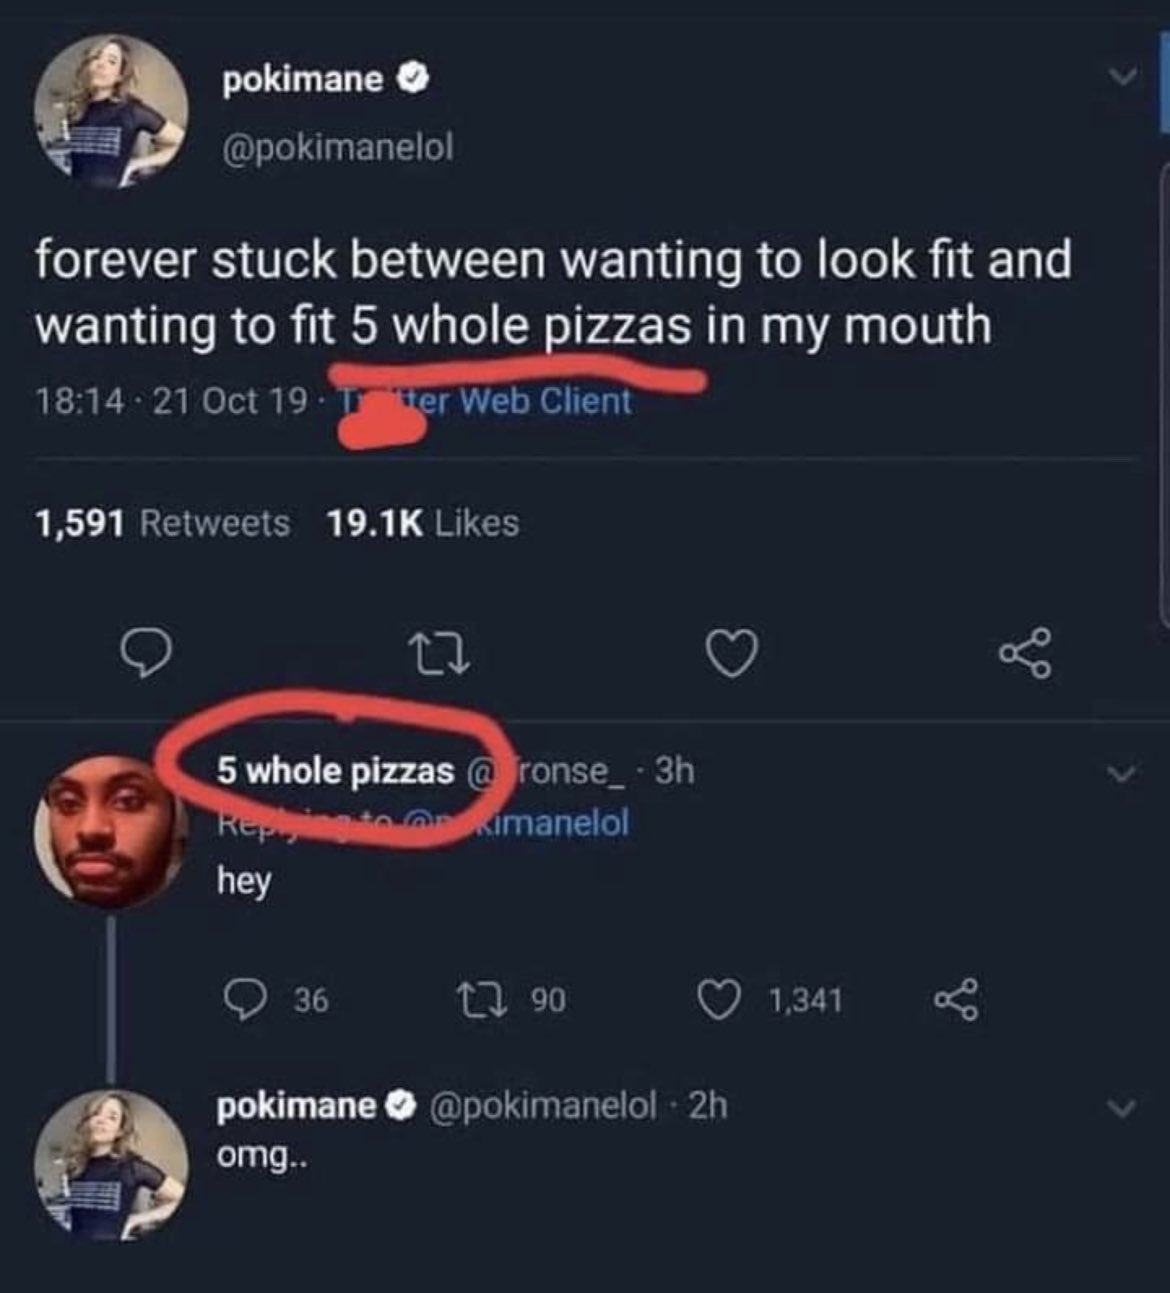 internet hall of  fame - forever stuck between wanting to look fit - pokimane forever stuck between wanting to look fit and wanting to fit 5 whole pizzas in my mouth 21 Oct 19 Ter Web Client 1,591 27 5 whole pizzas onkimanelol hey 36 190 pokimane 2h omg..